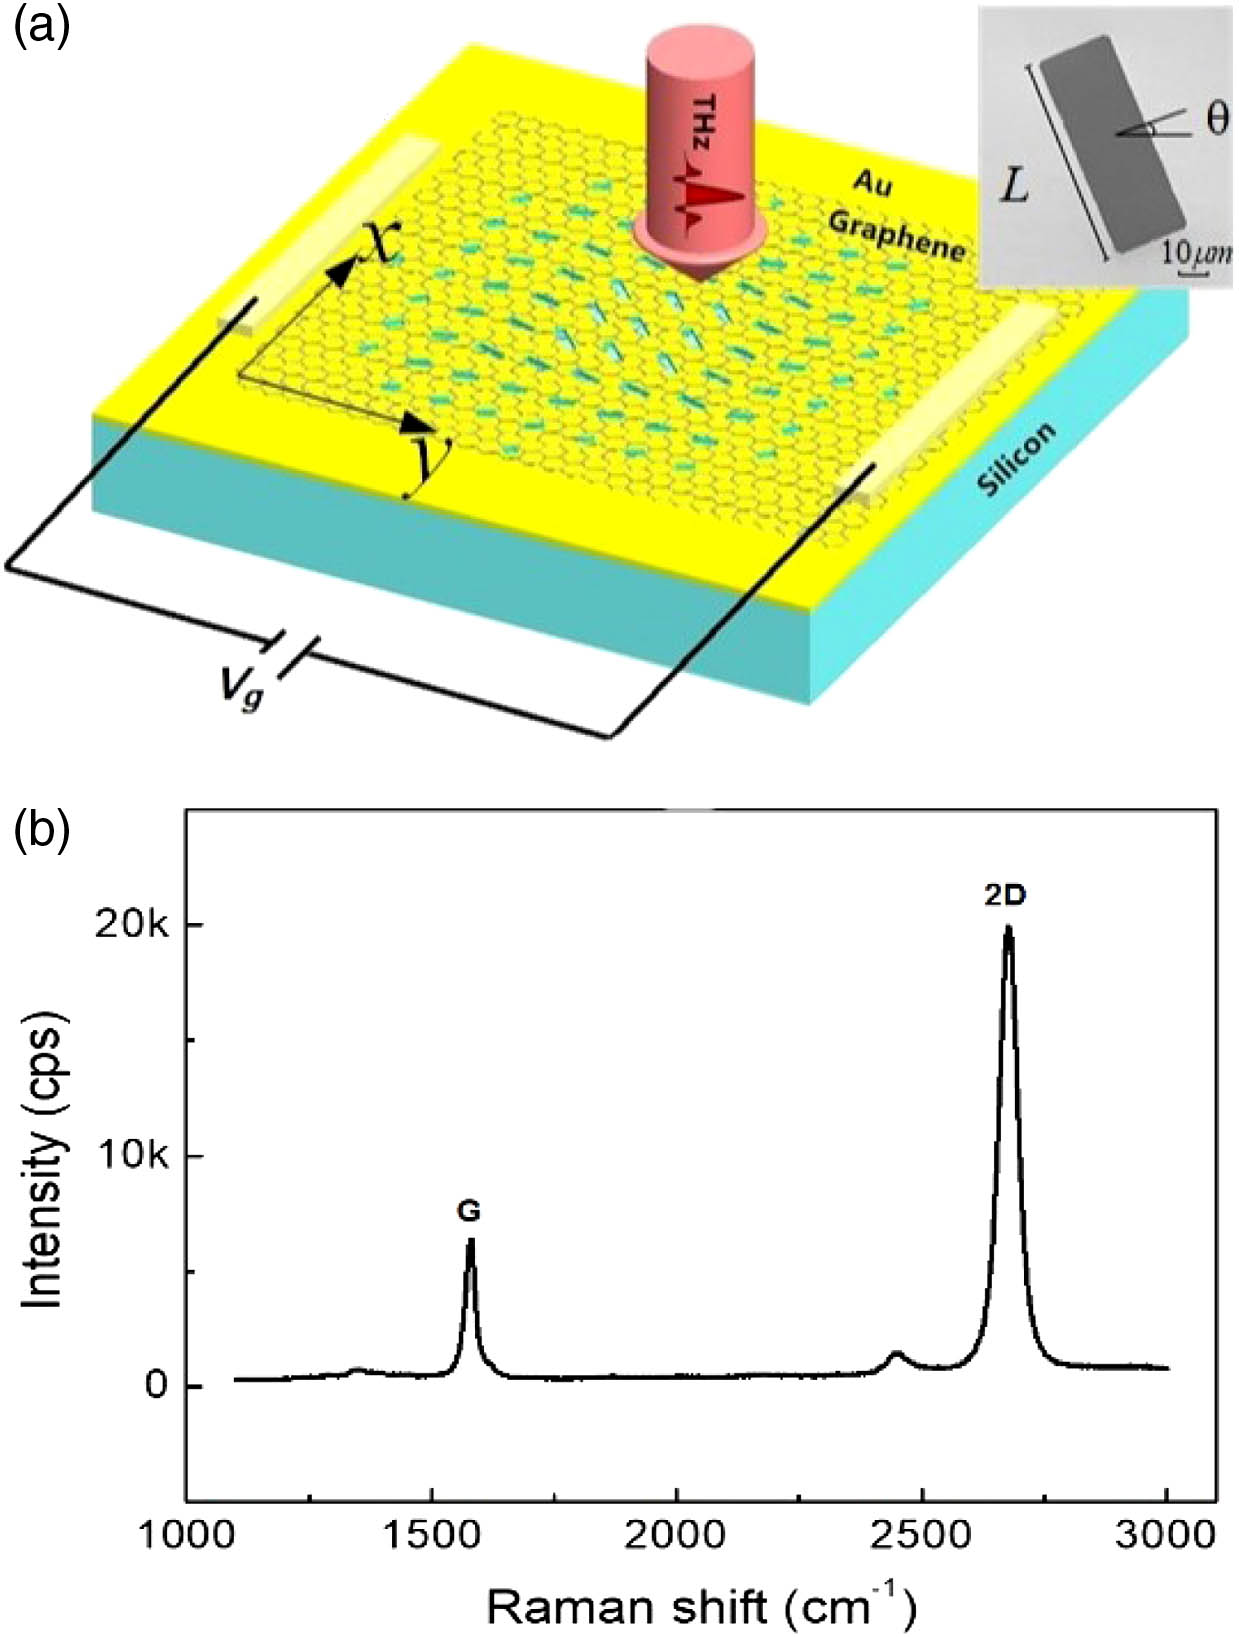 (a) Schematic of the active THz meta-lens. The lens consists of a high-resistance silicon substrate, an Au metasurface of rectangular aperture antennas with different lengths and rotations, and a monolayer graphene. The incident THz wave is left-handed circularly polarized. The inset shows an SEM photograph of a unit cell of the apertures. (b) Raman spectrum of the monolayer graphene on the top of the Au metasurface.